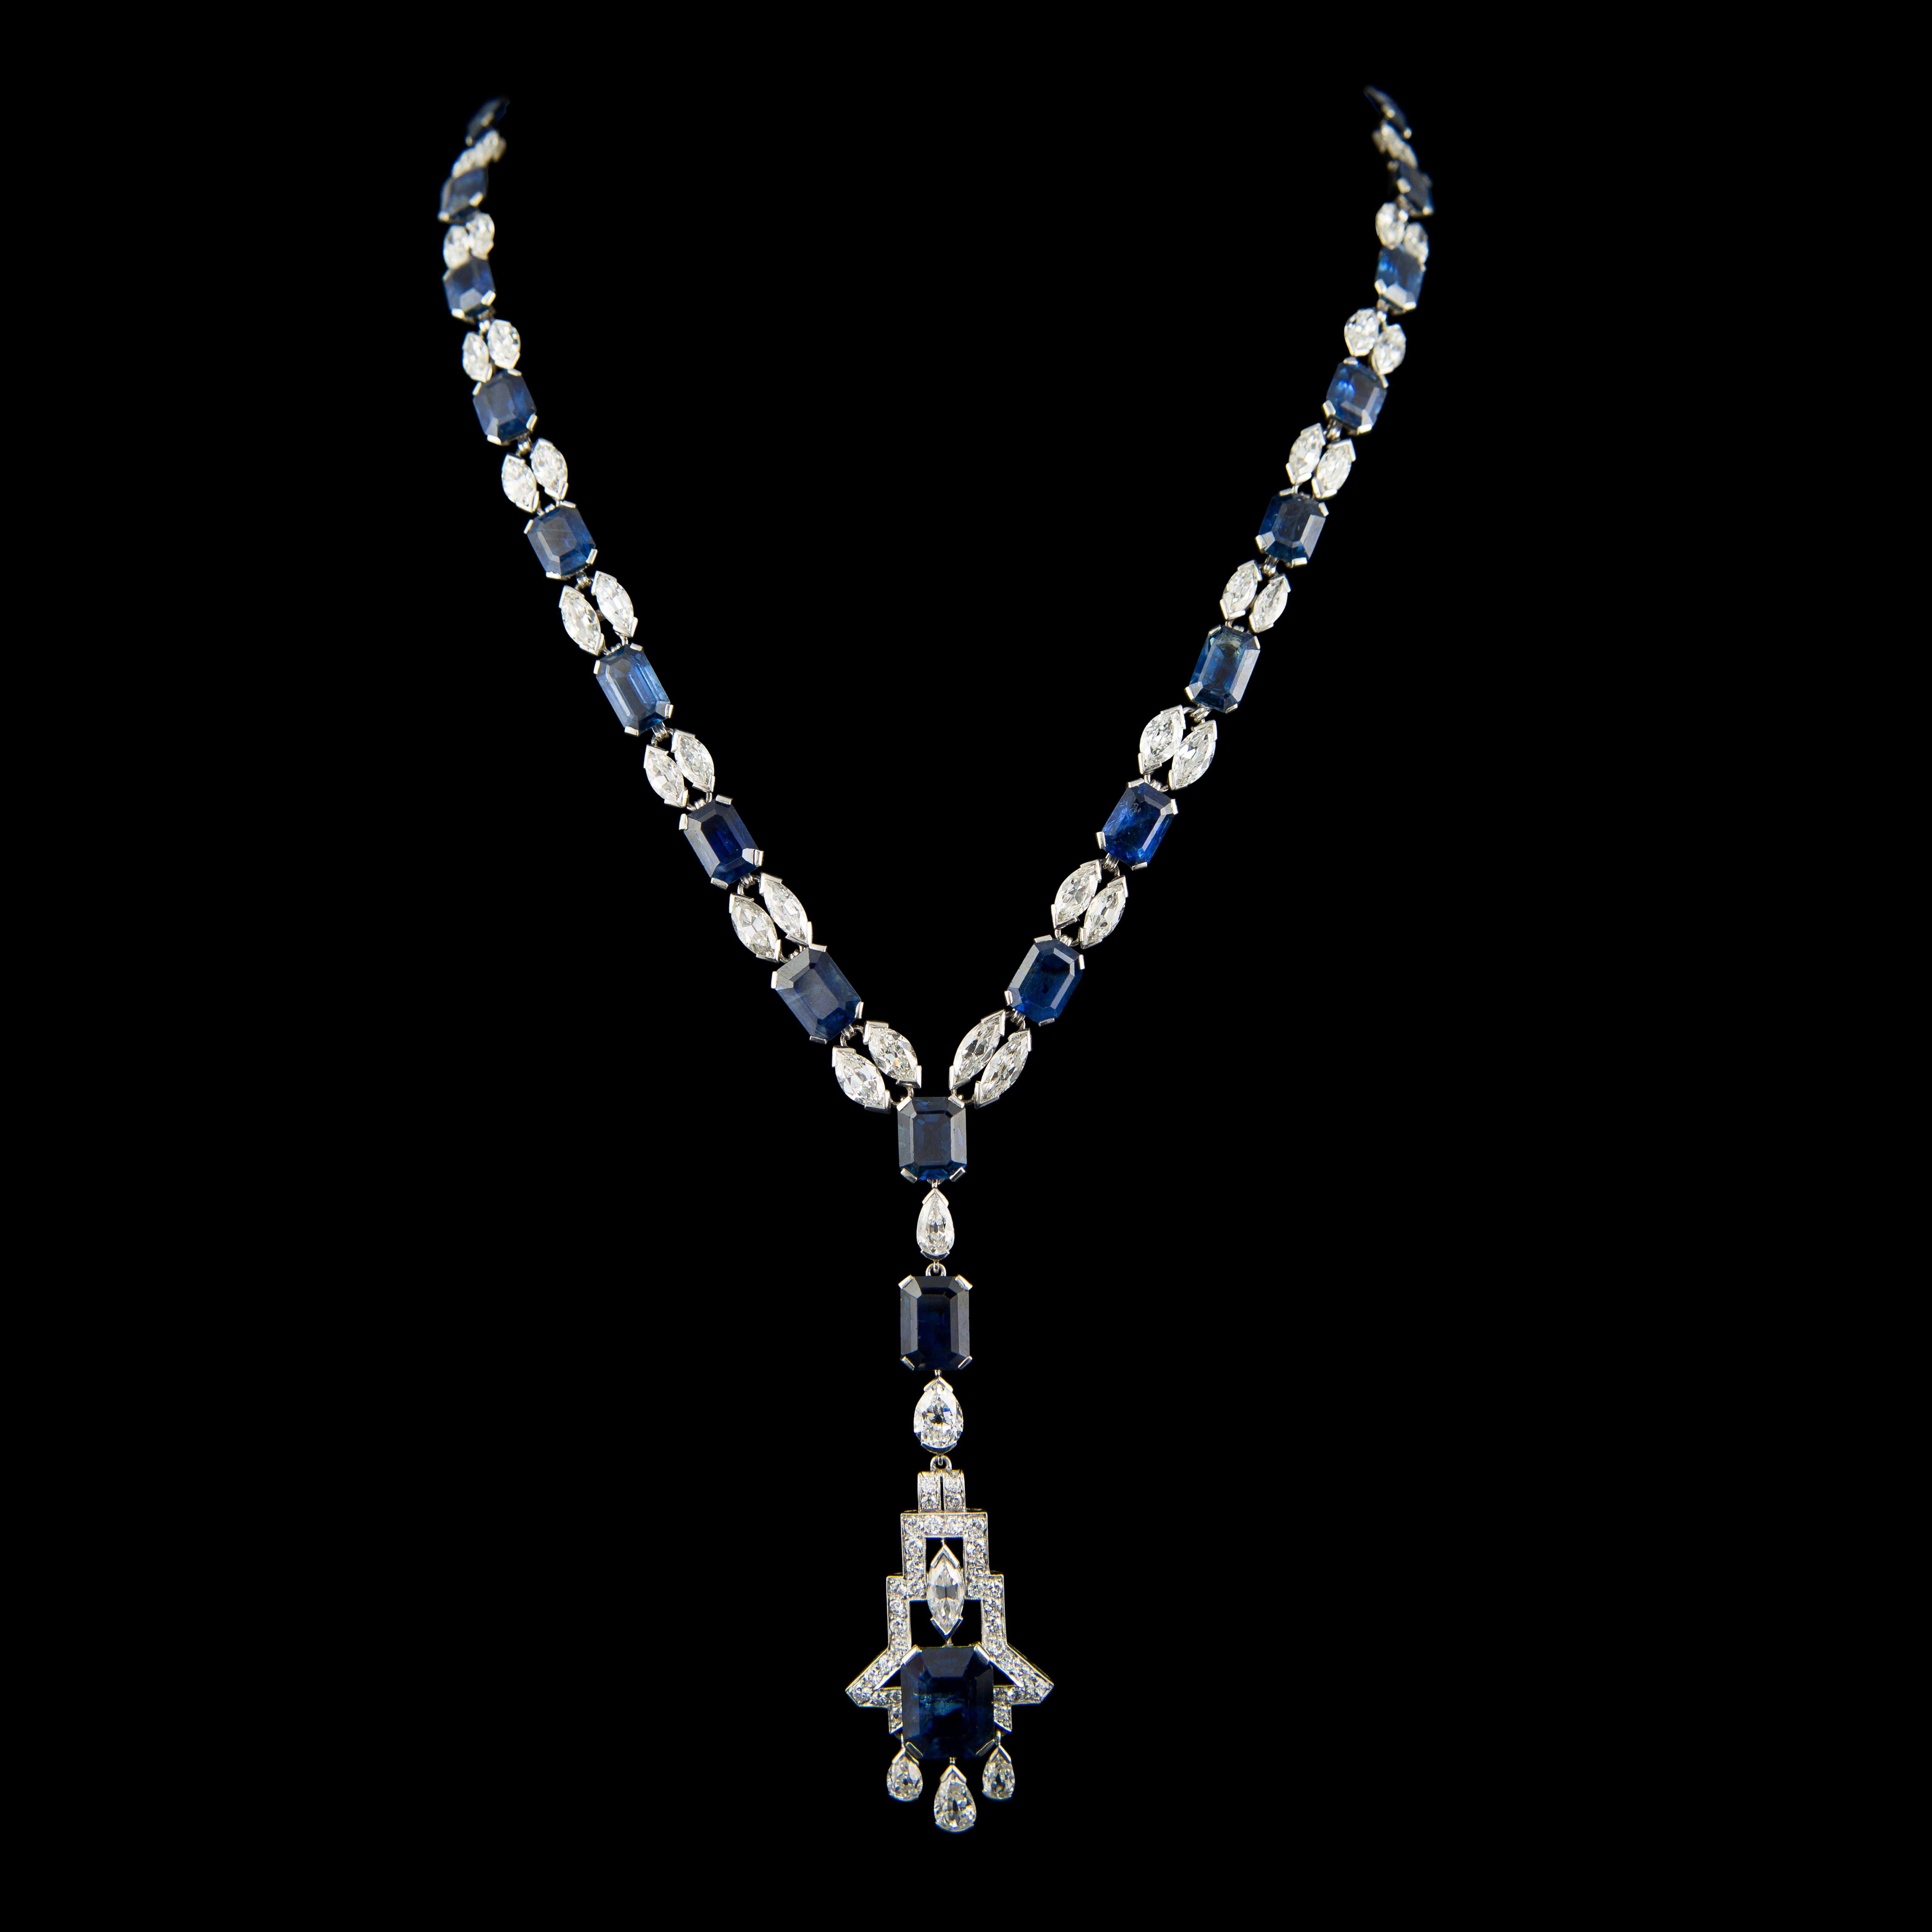 131.05 Carat No Heat Sapphires and Diamonds Necklace and Earrings Platinum For Sale 1